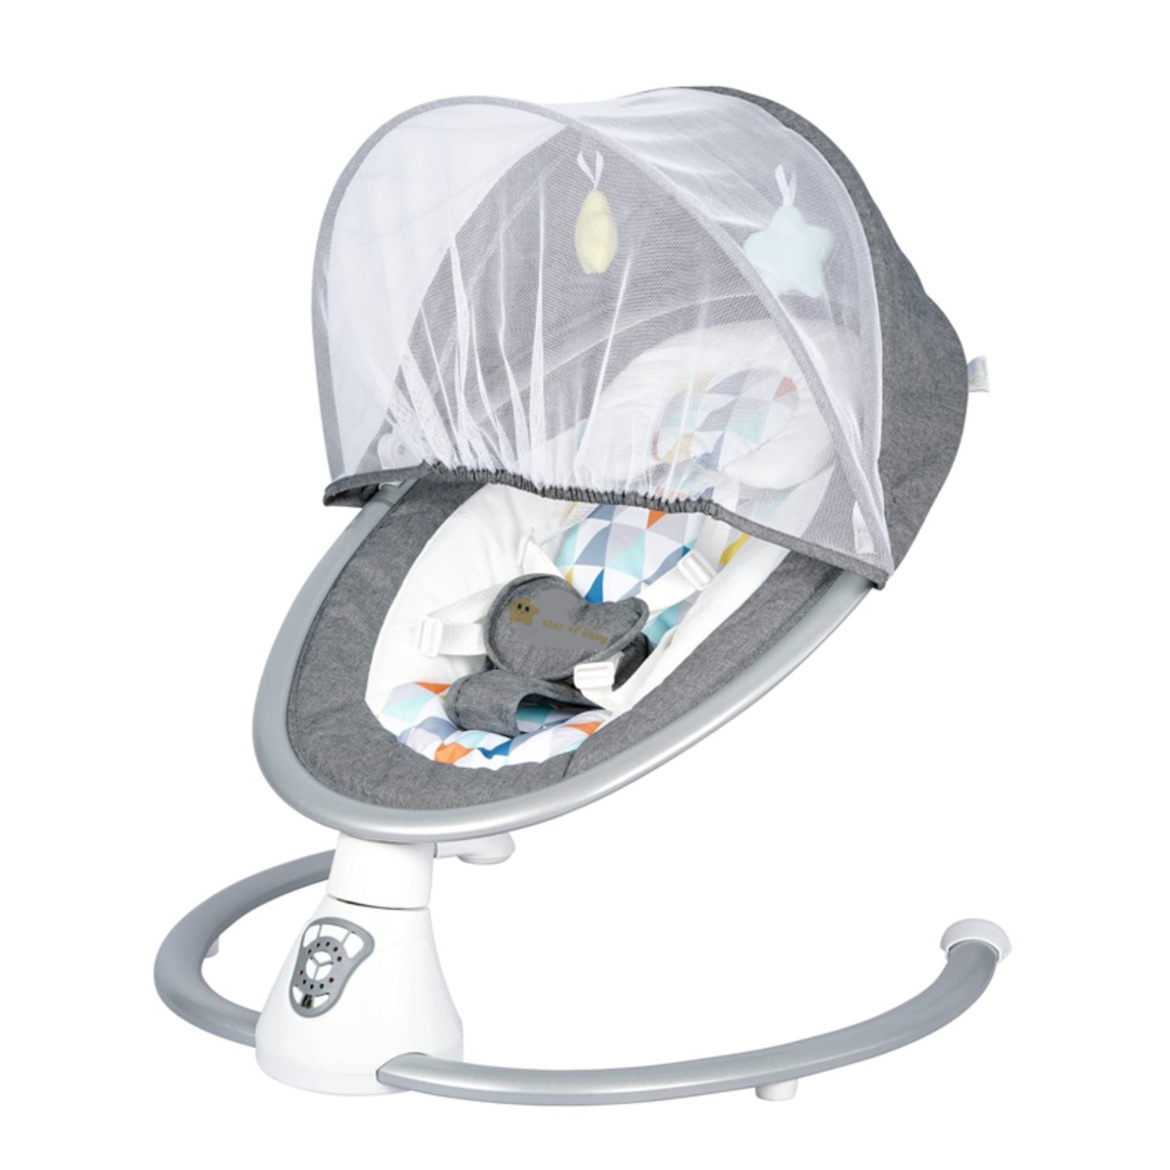 Star of Baby Cocoon The Smart Auto Swing, Adjustable Rocking Chair with Music, Hanging Toys, Mosquito Net, Baby Bassinet With Remote Control, Electric Baby Bouncer seat For Newborn Baby, Infant (Grey) 